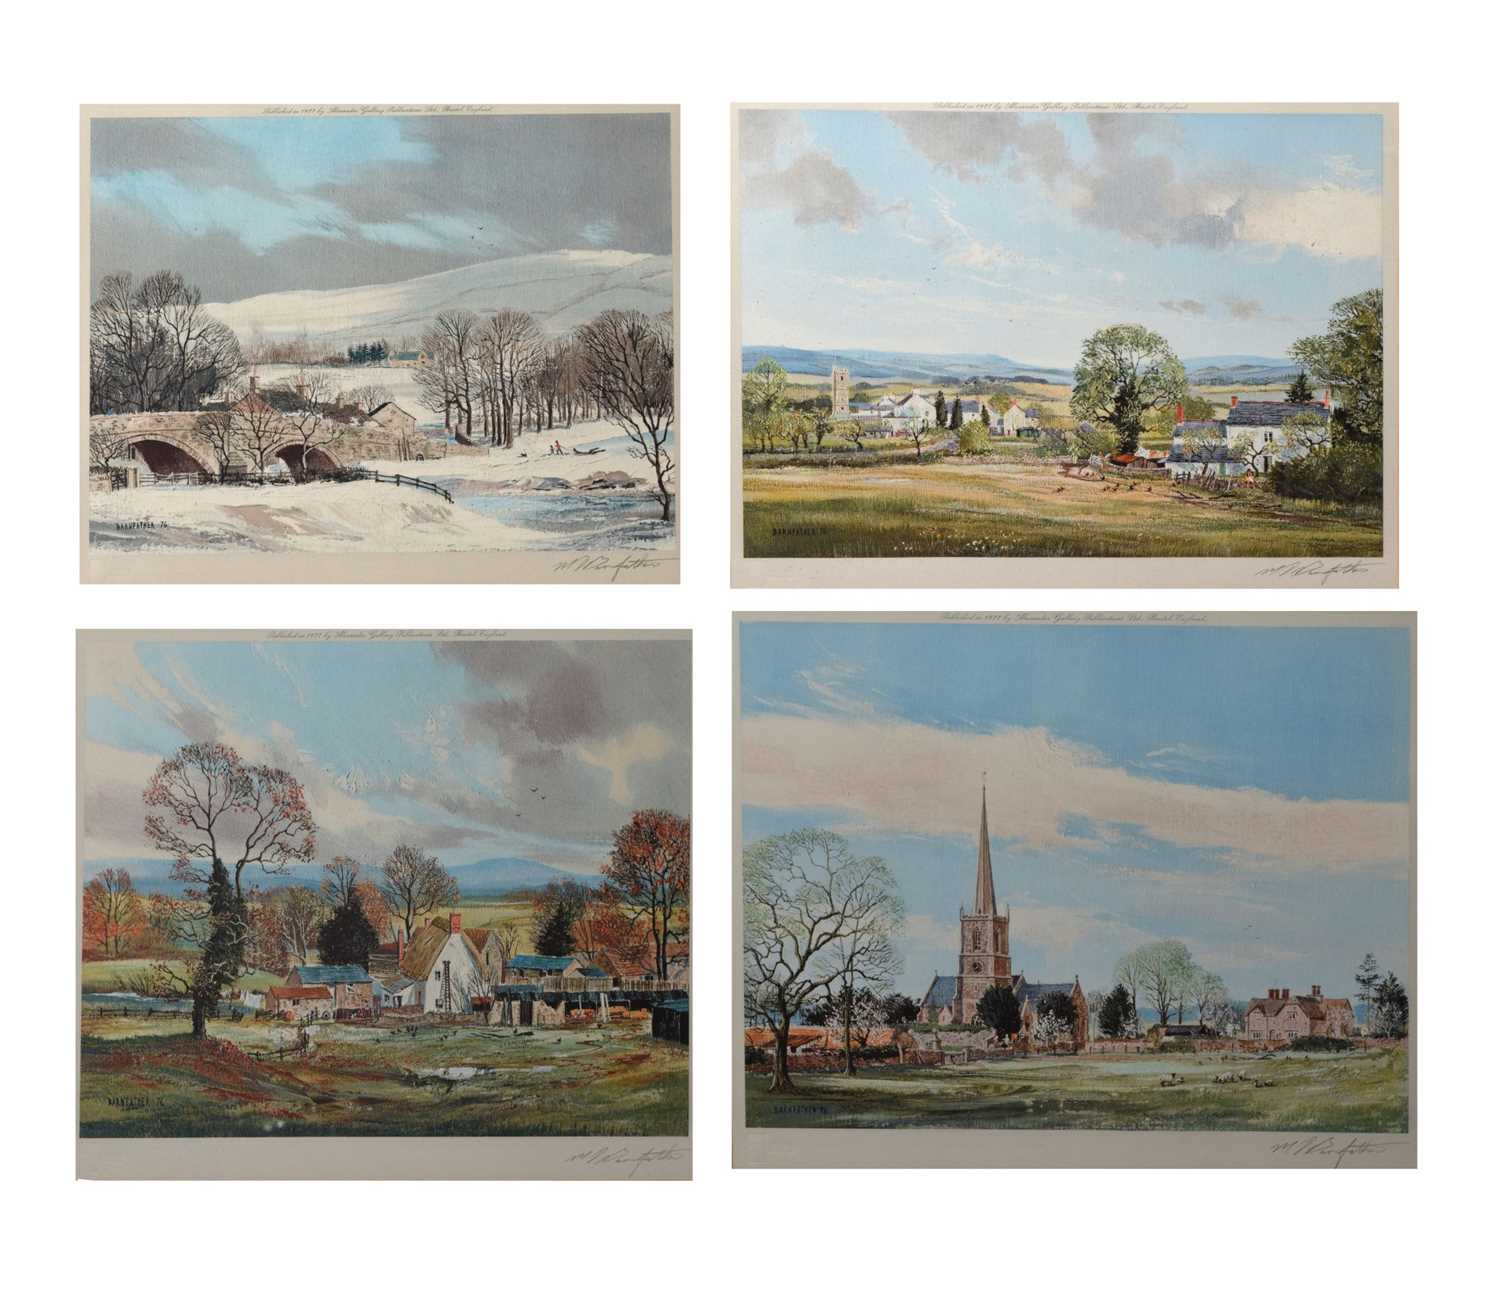 Michael Barnfather (b. 1934) - Set of four signed prints representing the Seasons